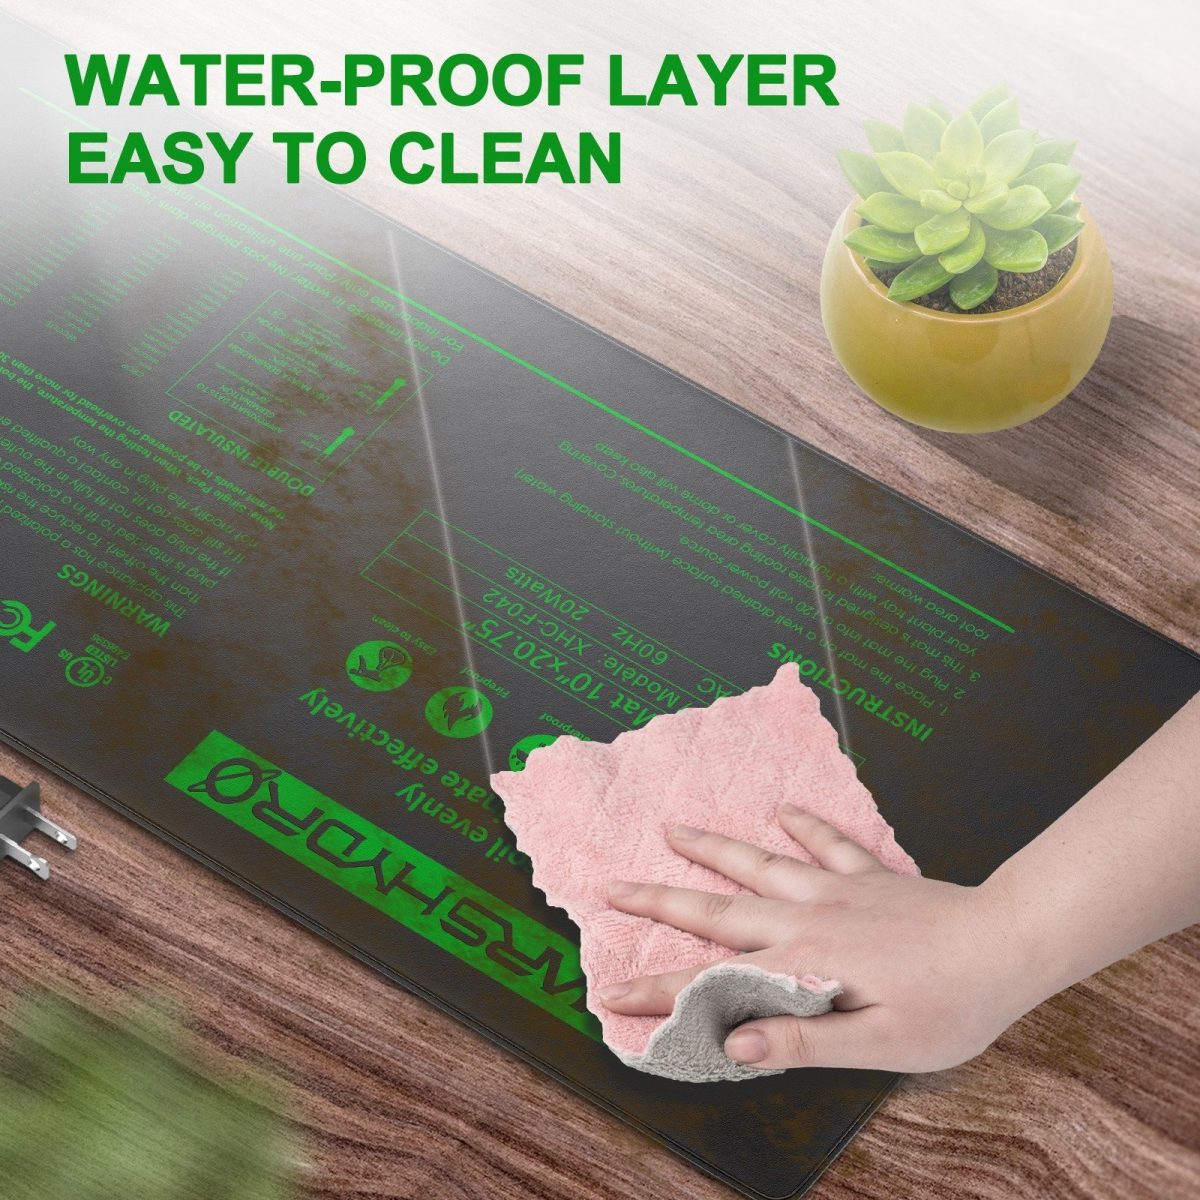 The mars hydro heat mat for plants uses waterproof layer, worry-free from electric shock and easy to clean